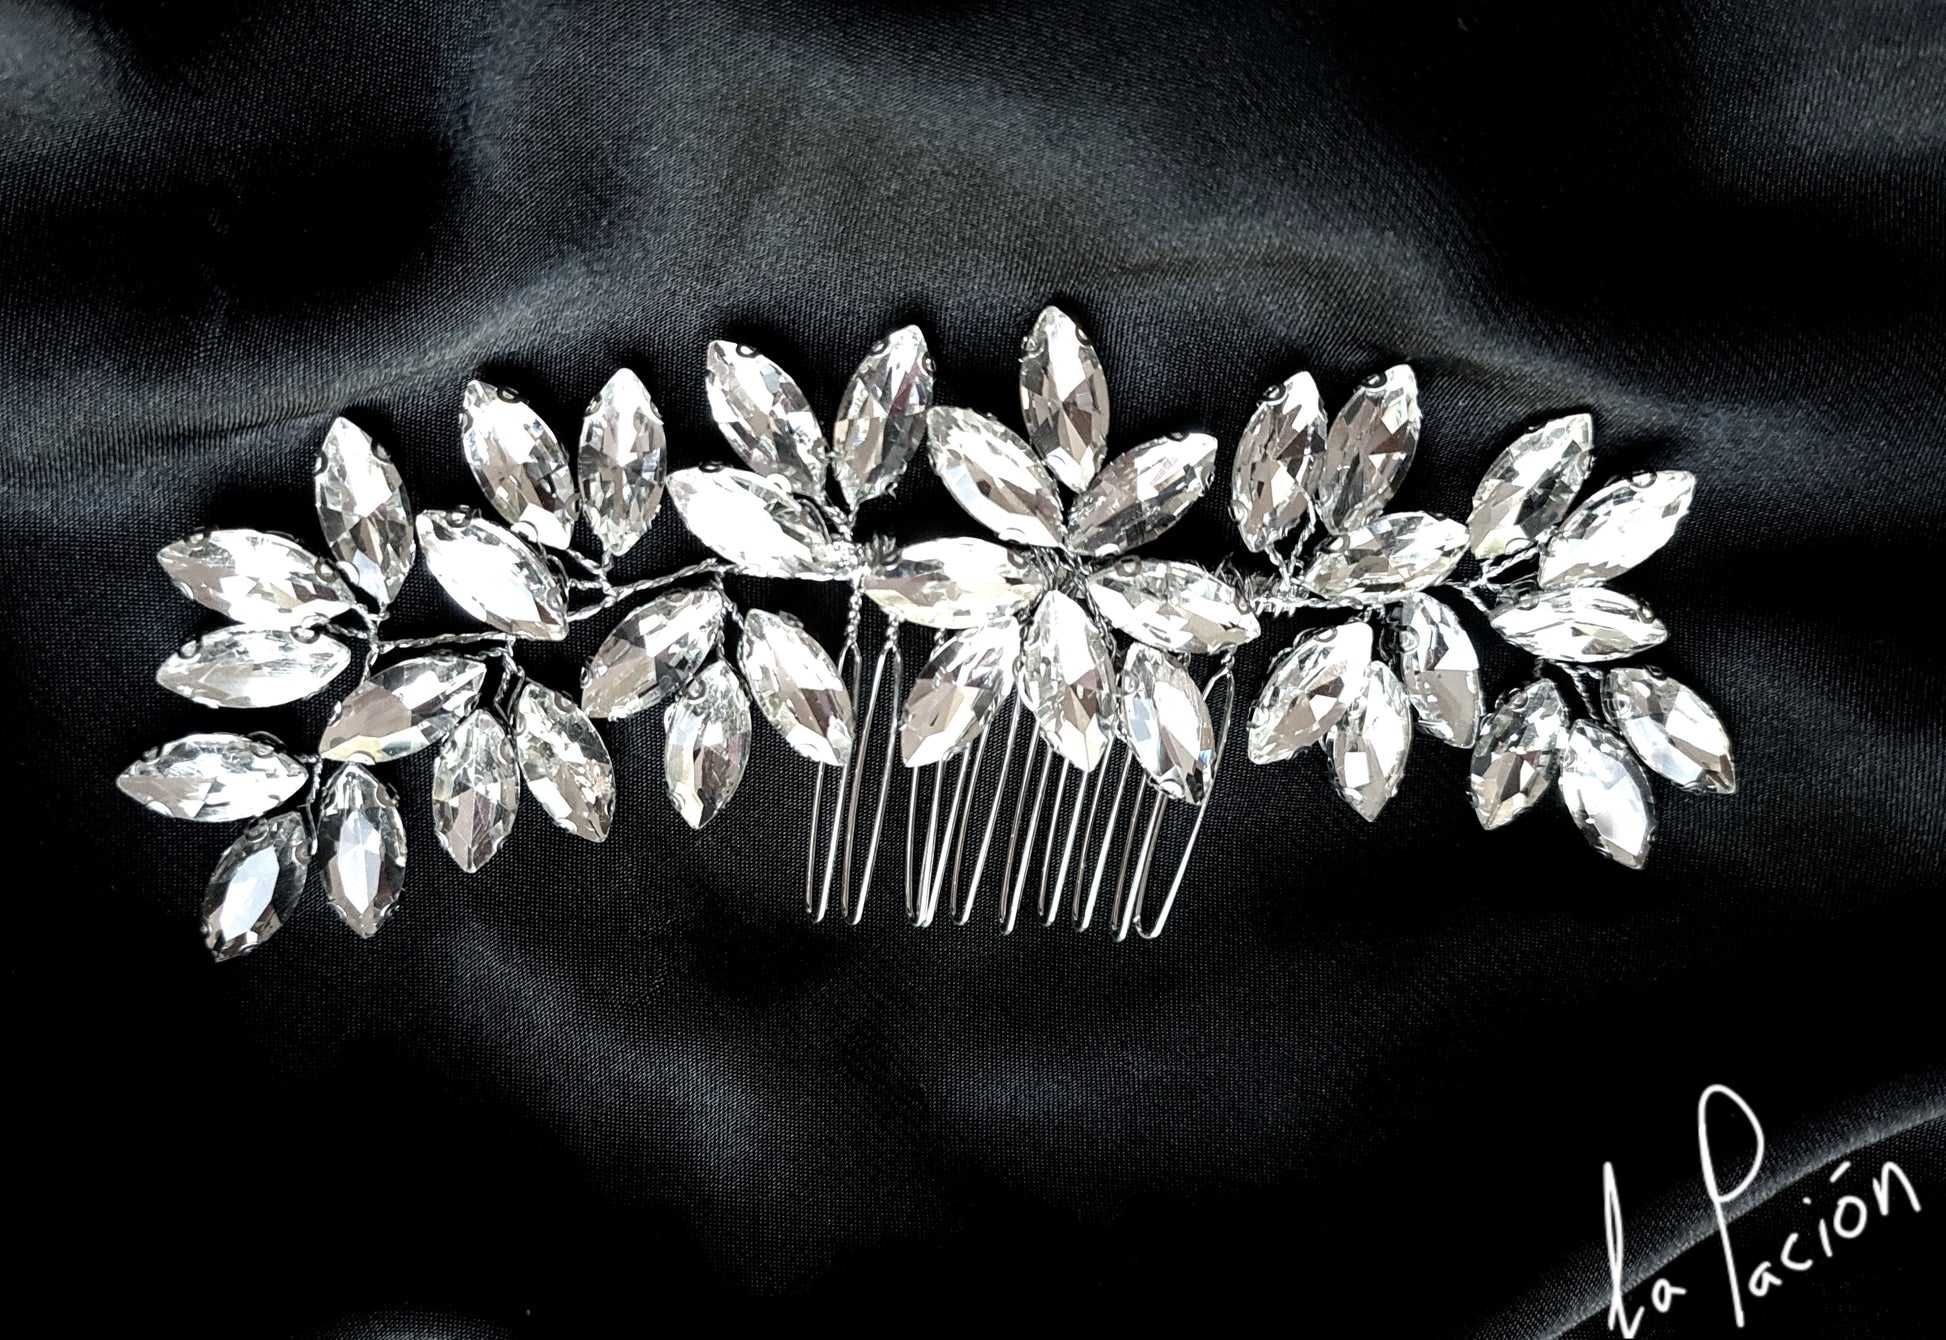 Ella Bridal Hair Comb showcasing its intricate design featuring sparkling cubic zirconia stones set in gleaming silver